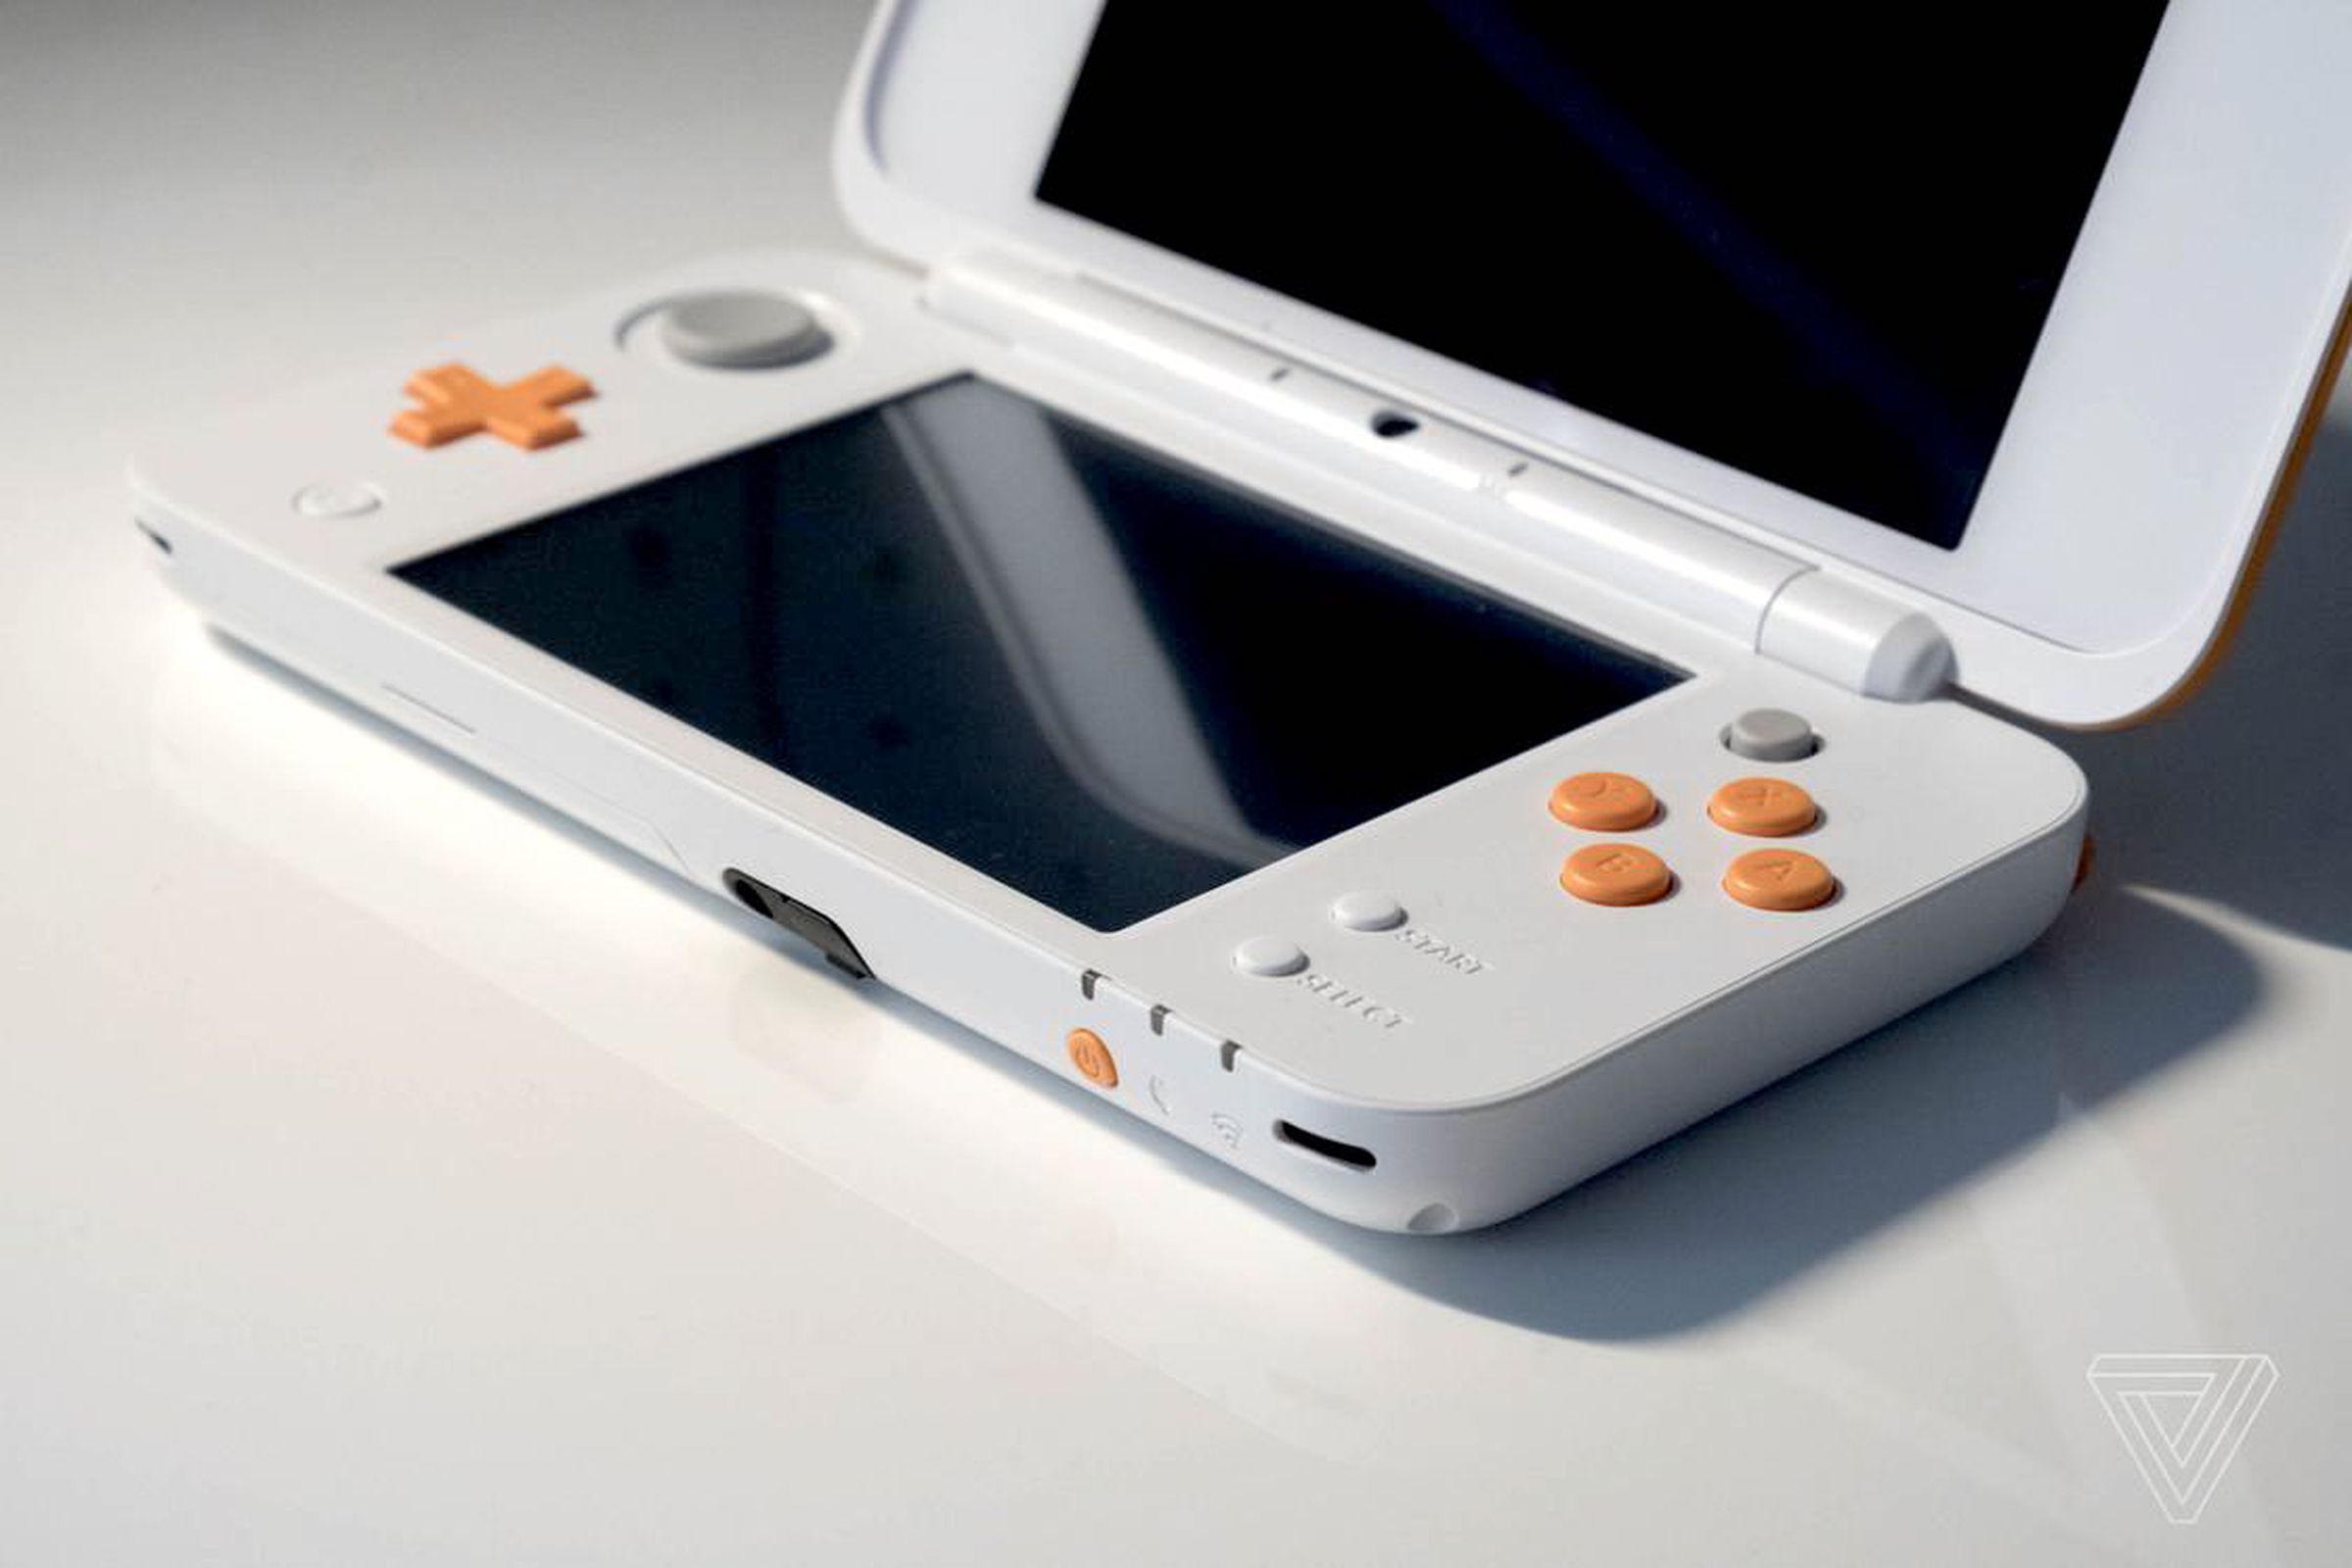 An image showing the bottom screen on a Nintendo 3DS